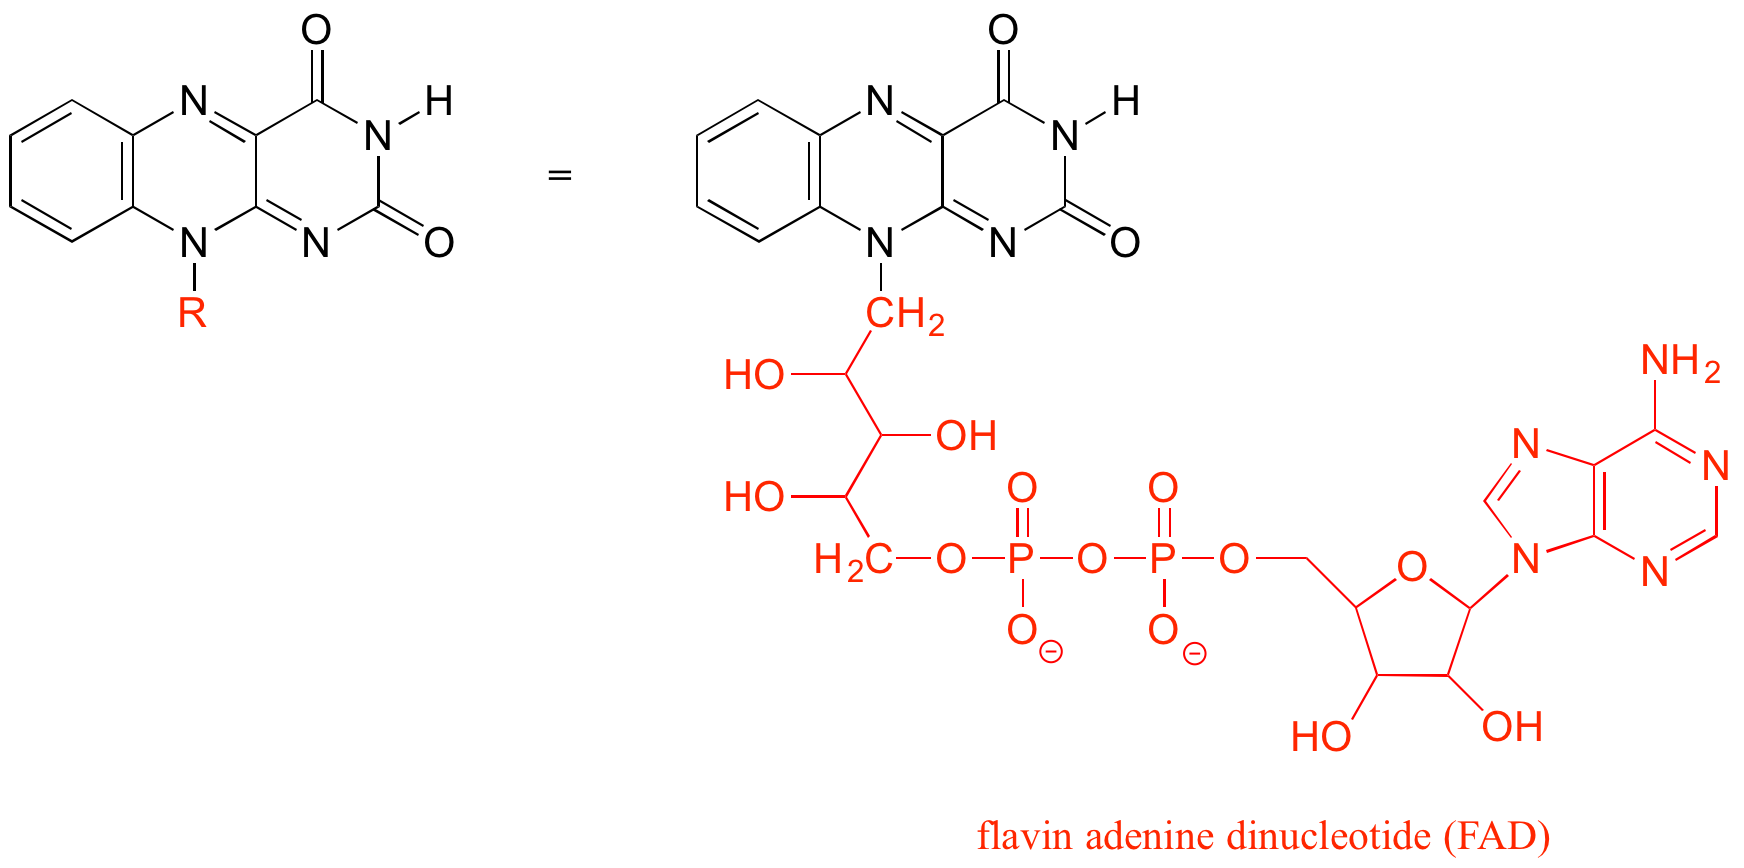 Example showing the entire structure of the very large molecule flavin adenine dinucleotide (FAD) and, beside it, the flavin portion of the molecule with R used in place of the rest of the structure.